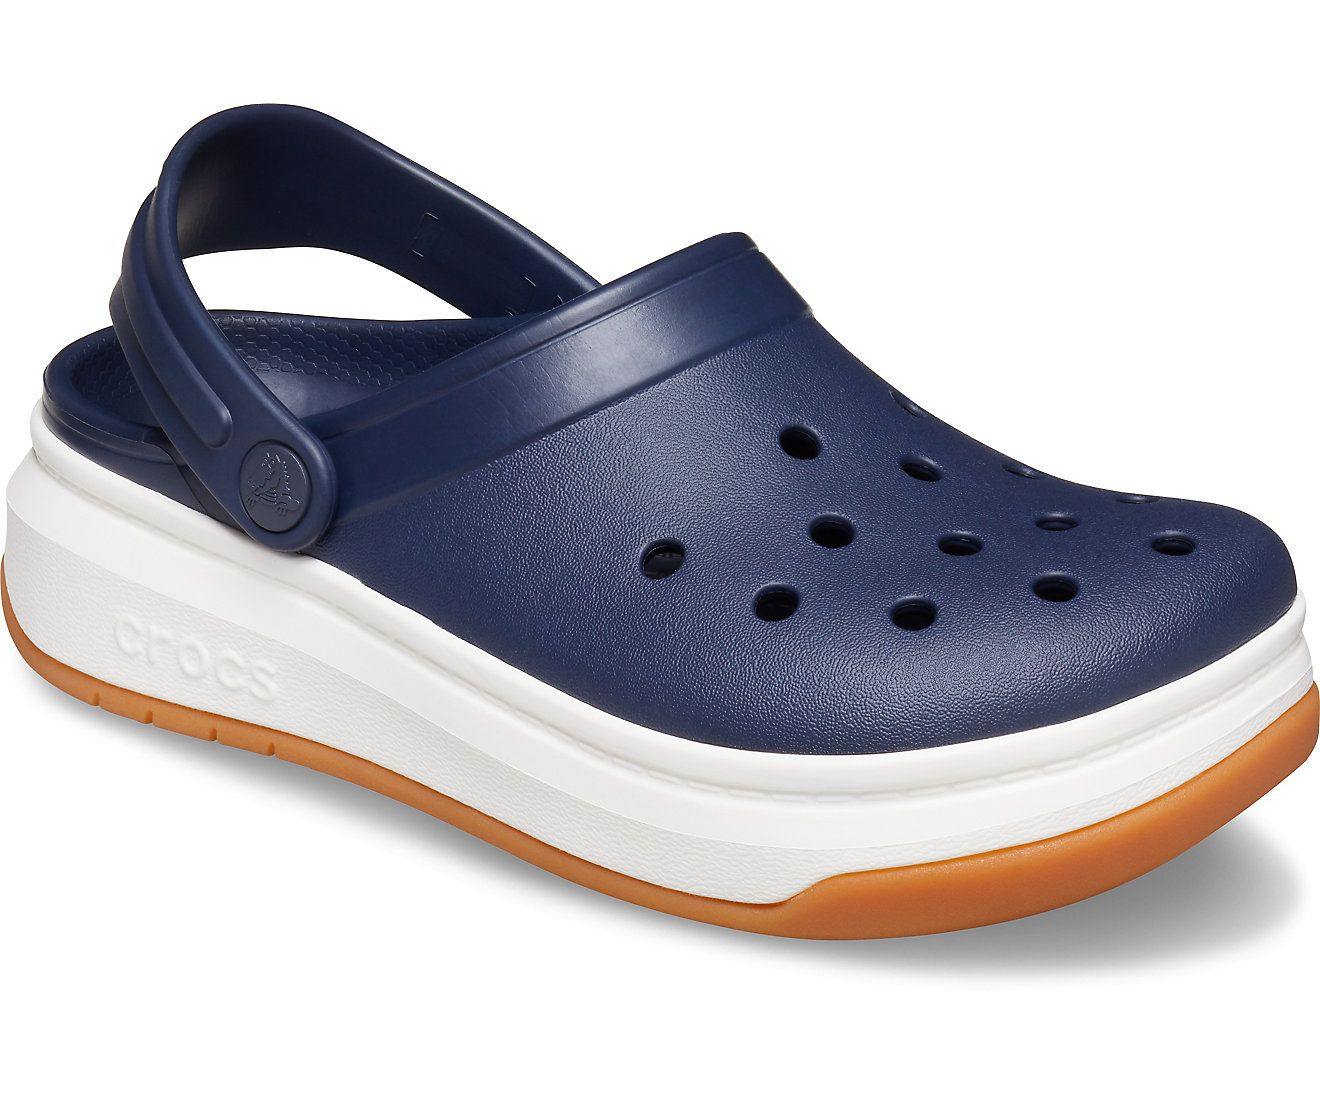 Authentic Crocband Full Force Clog - Navy/ White